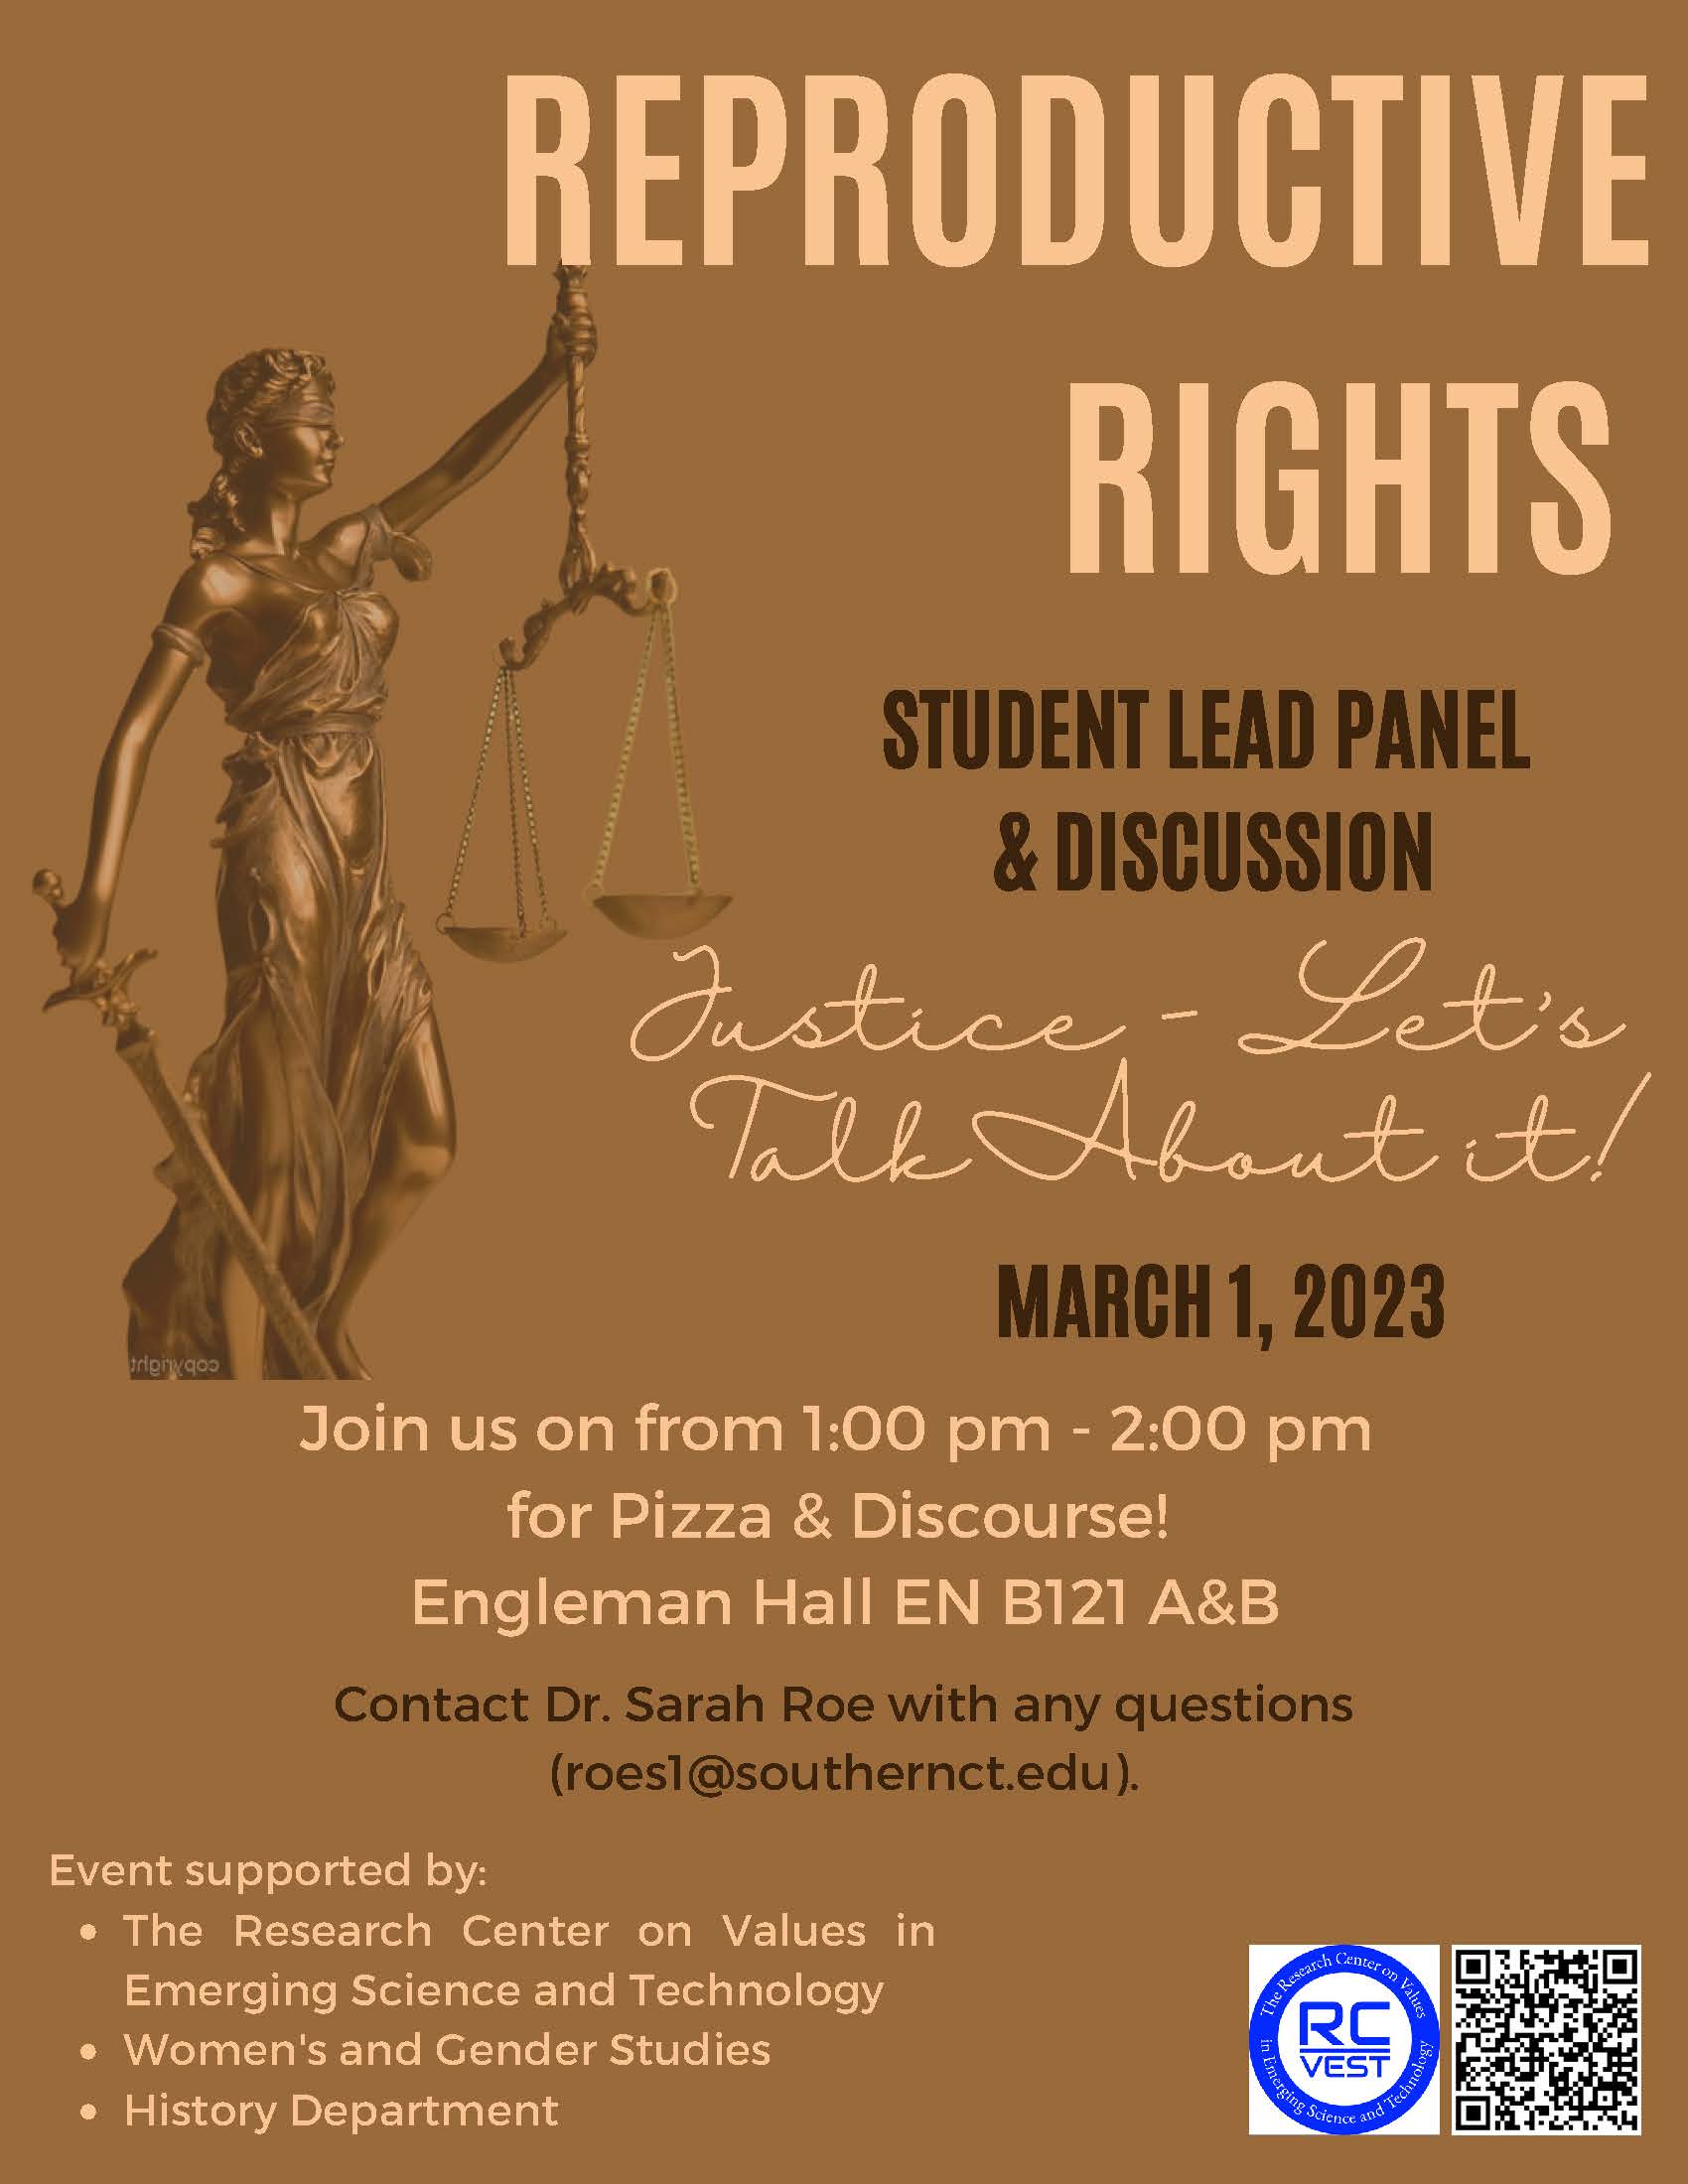 SCSU Student Panel: reproductive rights